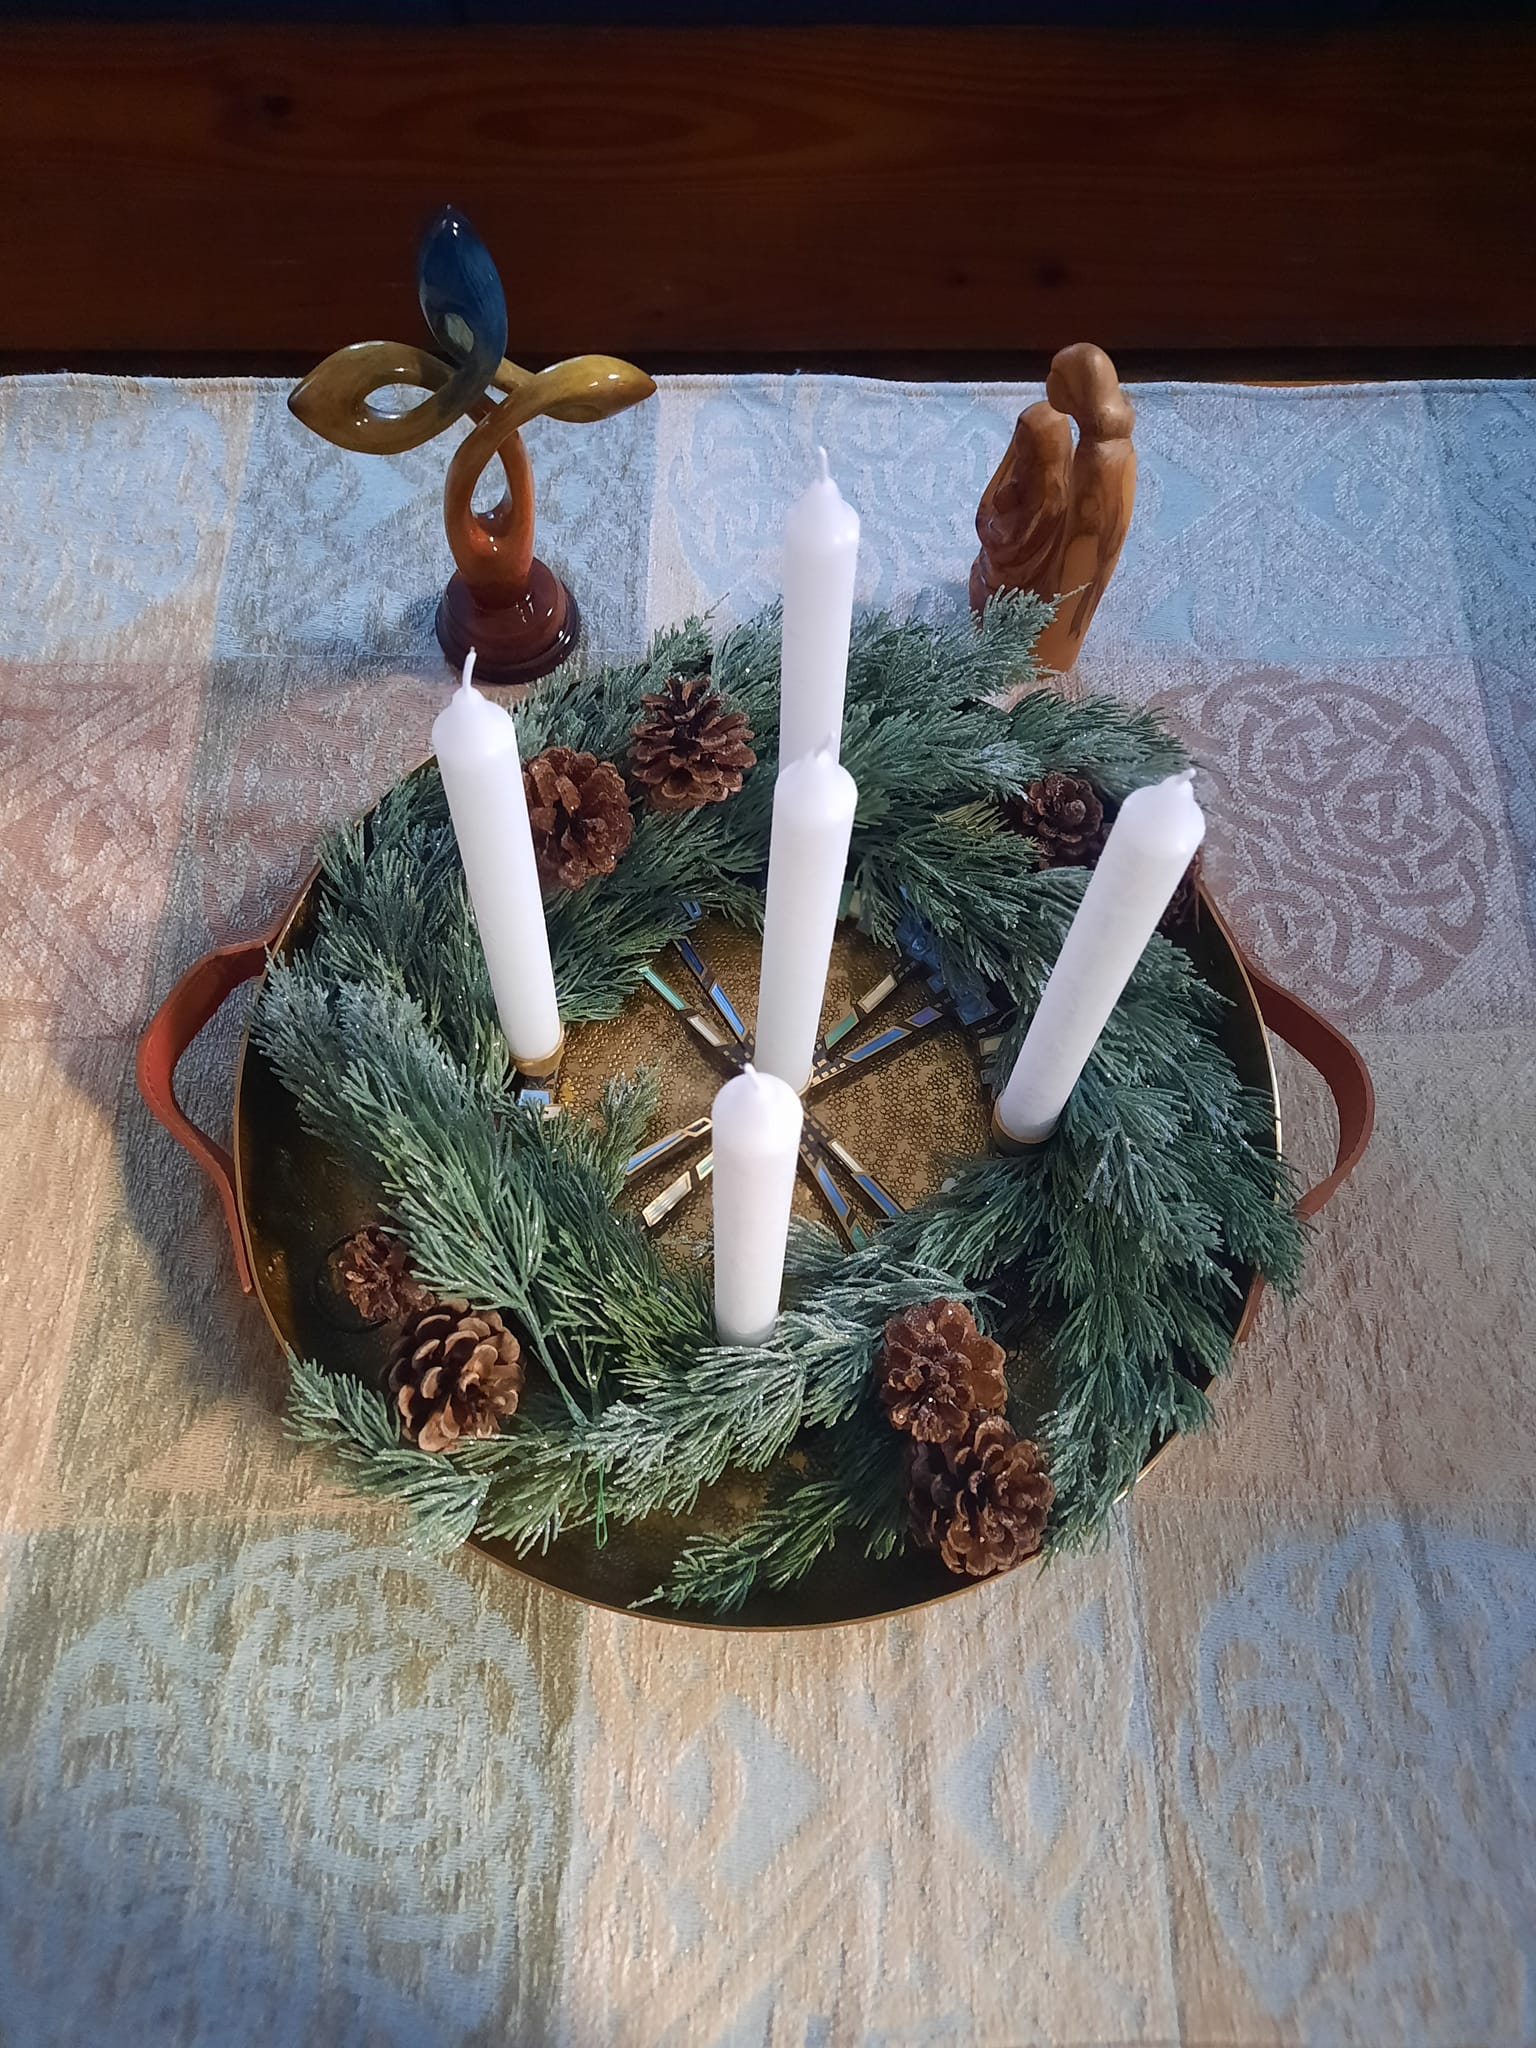 Advent wreath with four candles